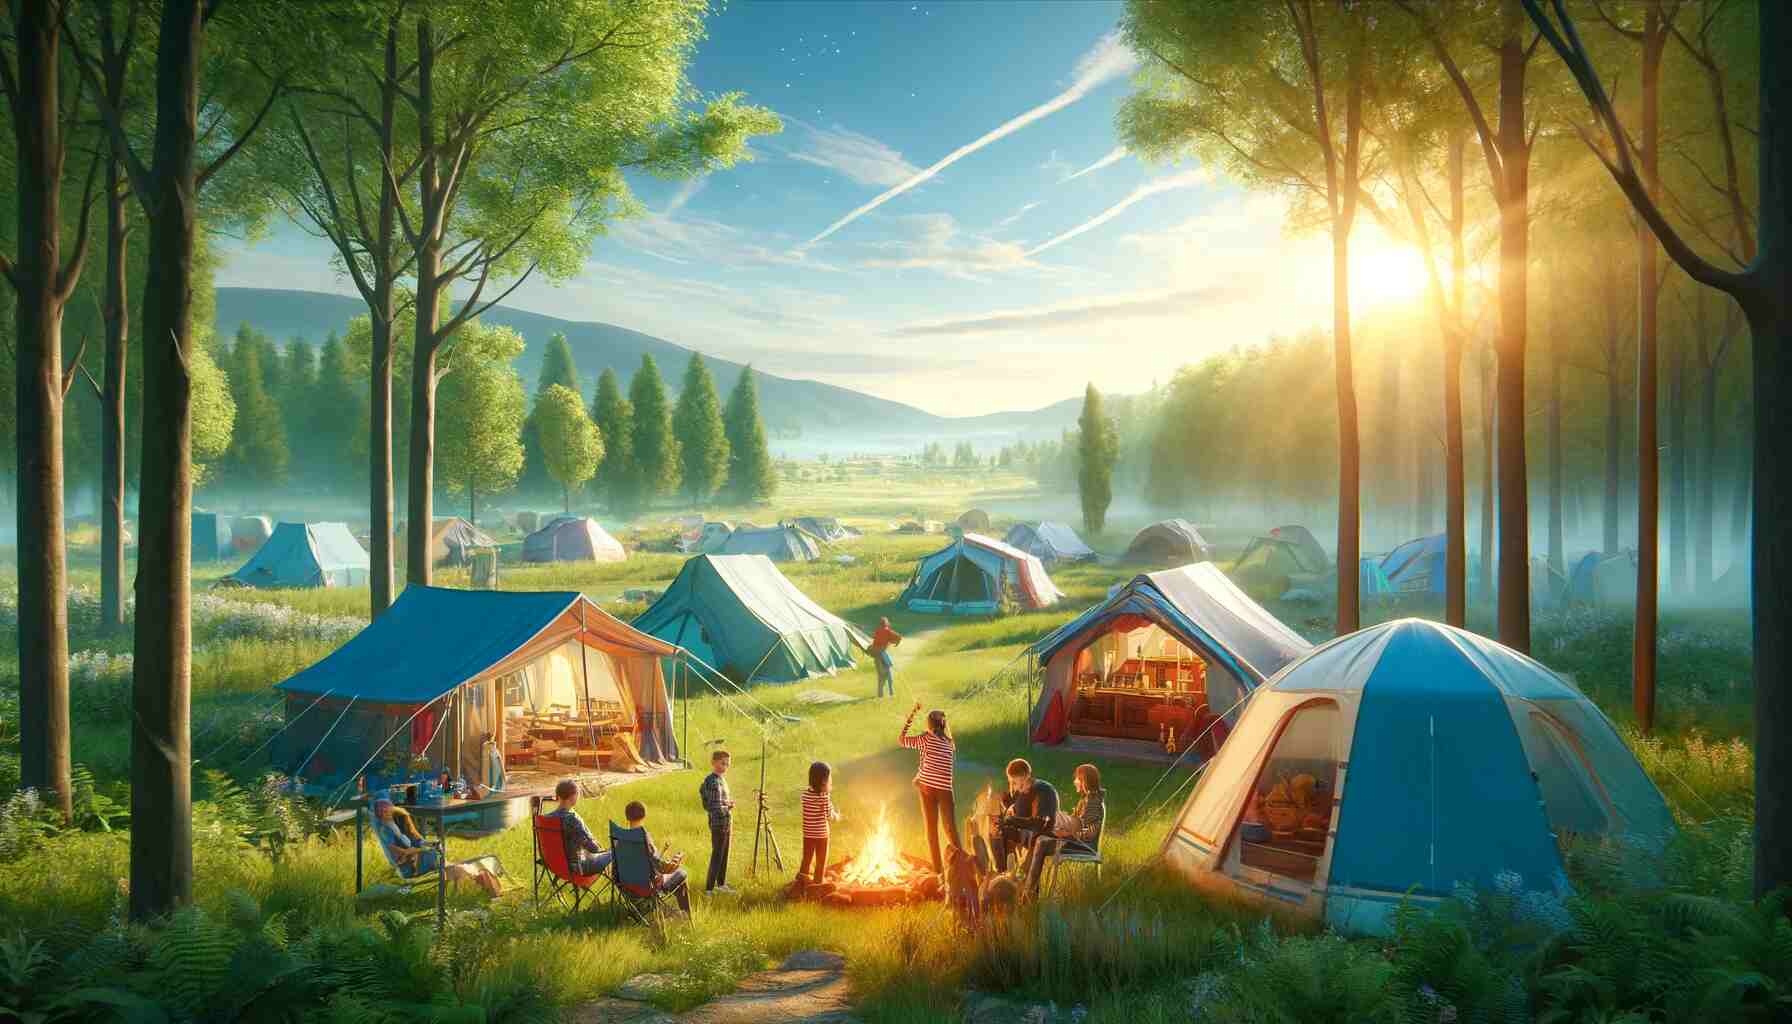 A photo of a scenic campsite with five different family tents set up, surrounded by lush greenery and a clear blue sky. Families are seen enjoying outdoor activities like roasting marshmallows over a campfire, playing games, and relaxing in camping chairs.